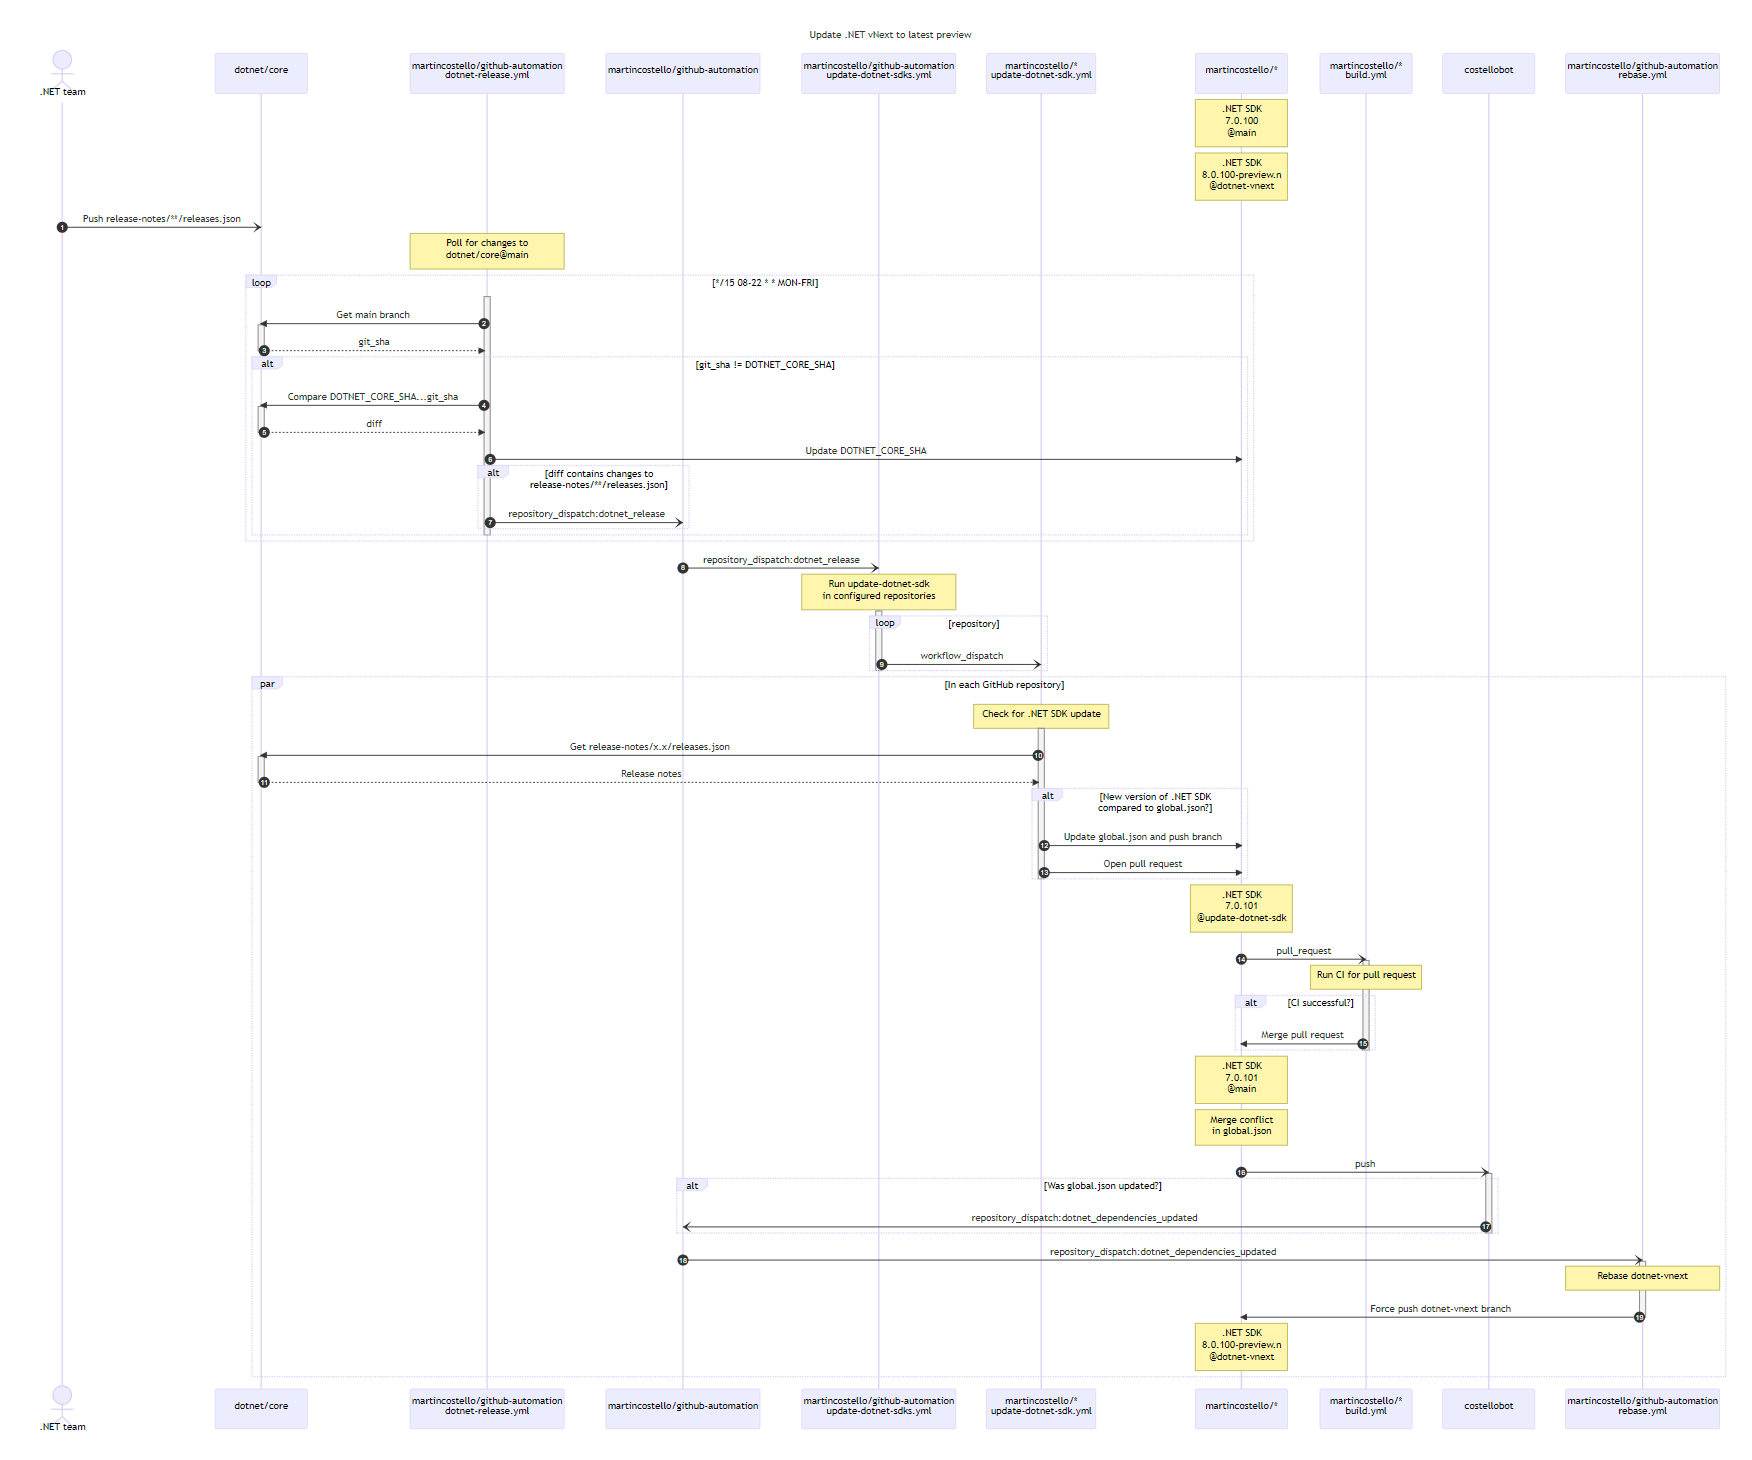 A sequence diagram showing the automated workflow